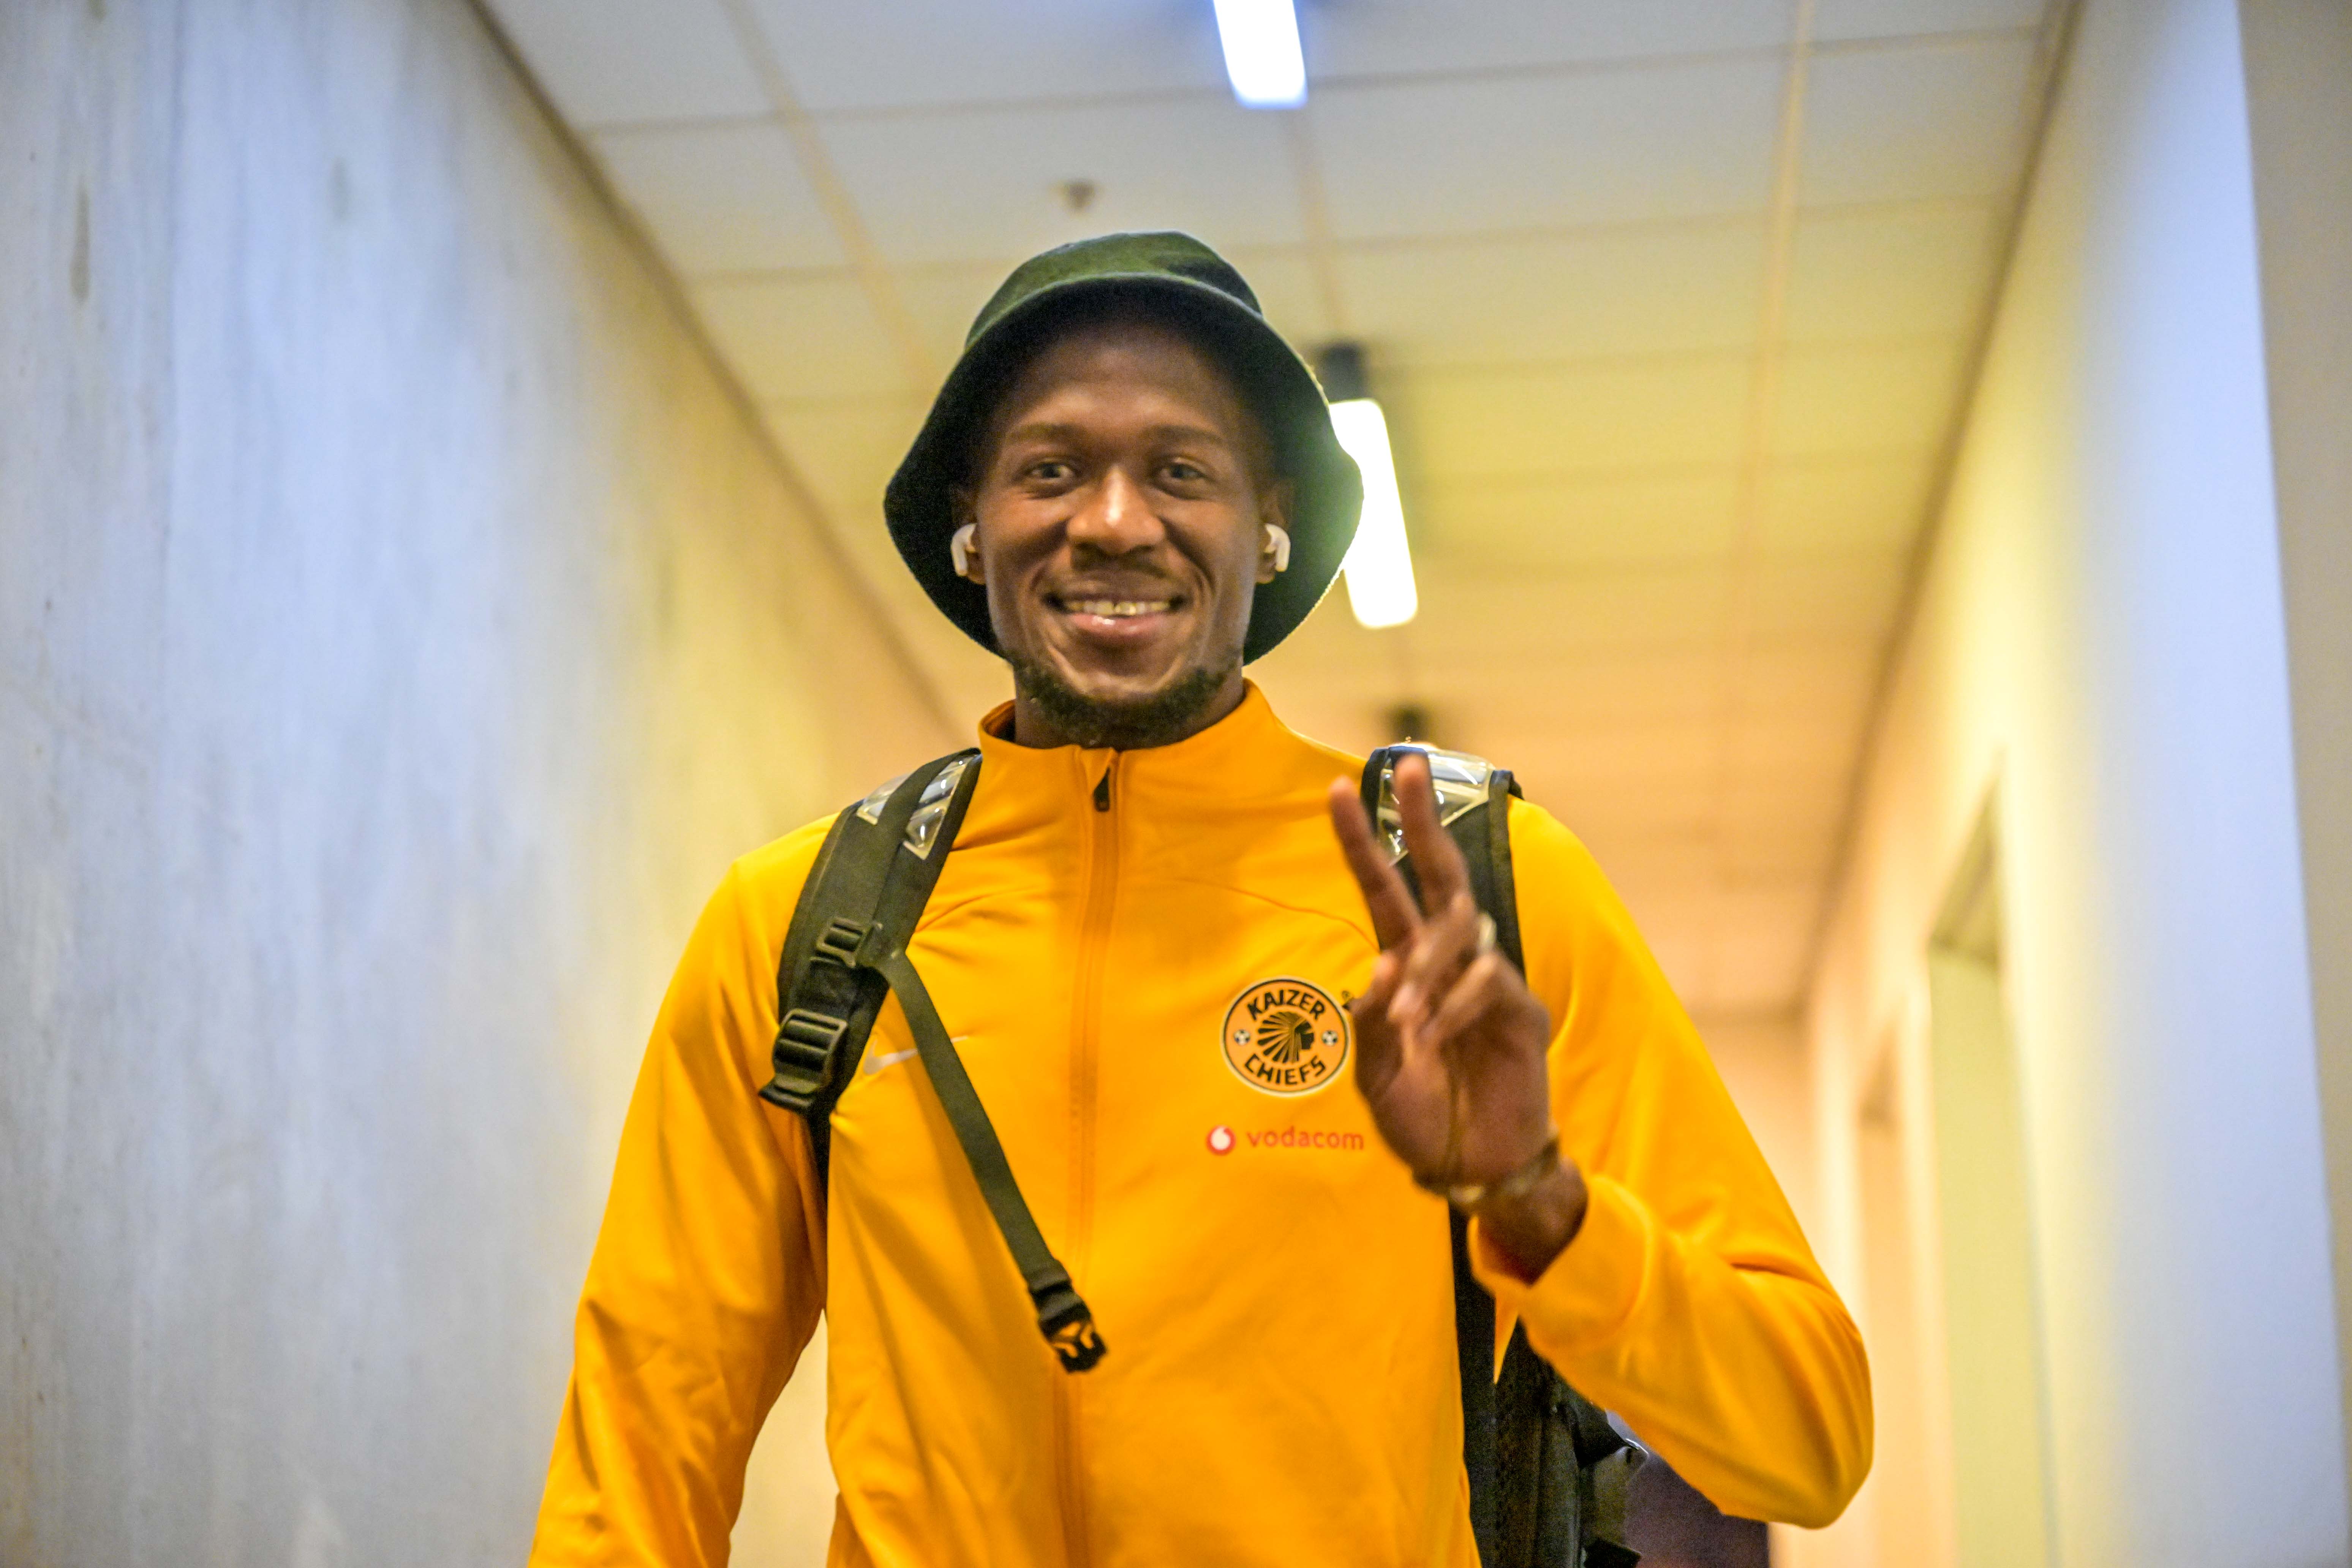 Kaizer Chiefs Left Back S'fiso Hlanti arriving at the stadium during the Dstv Premier match against SuperSport United at FNB Stadium